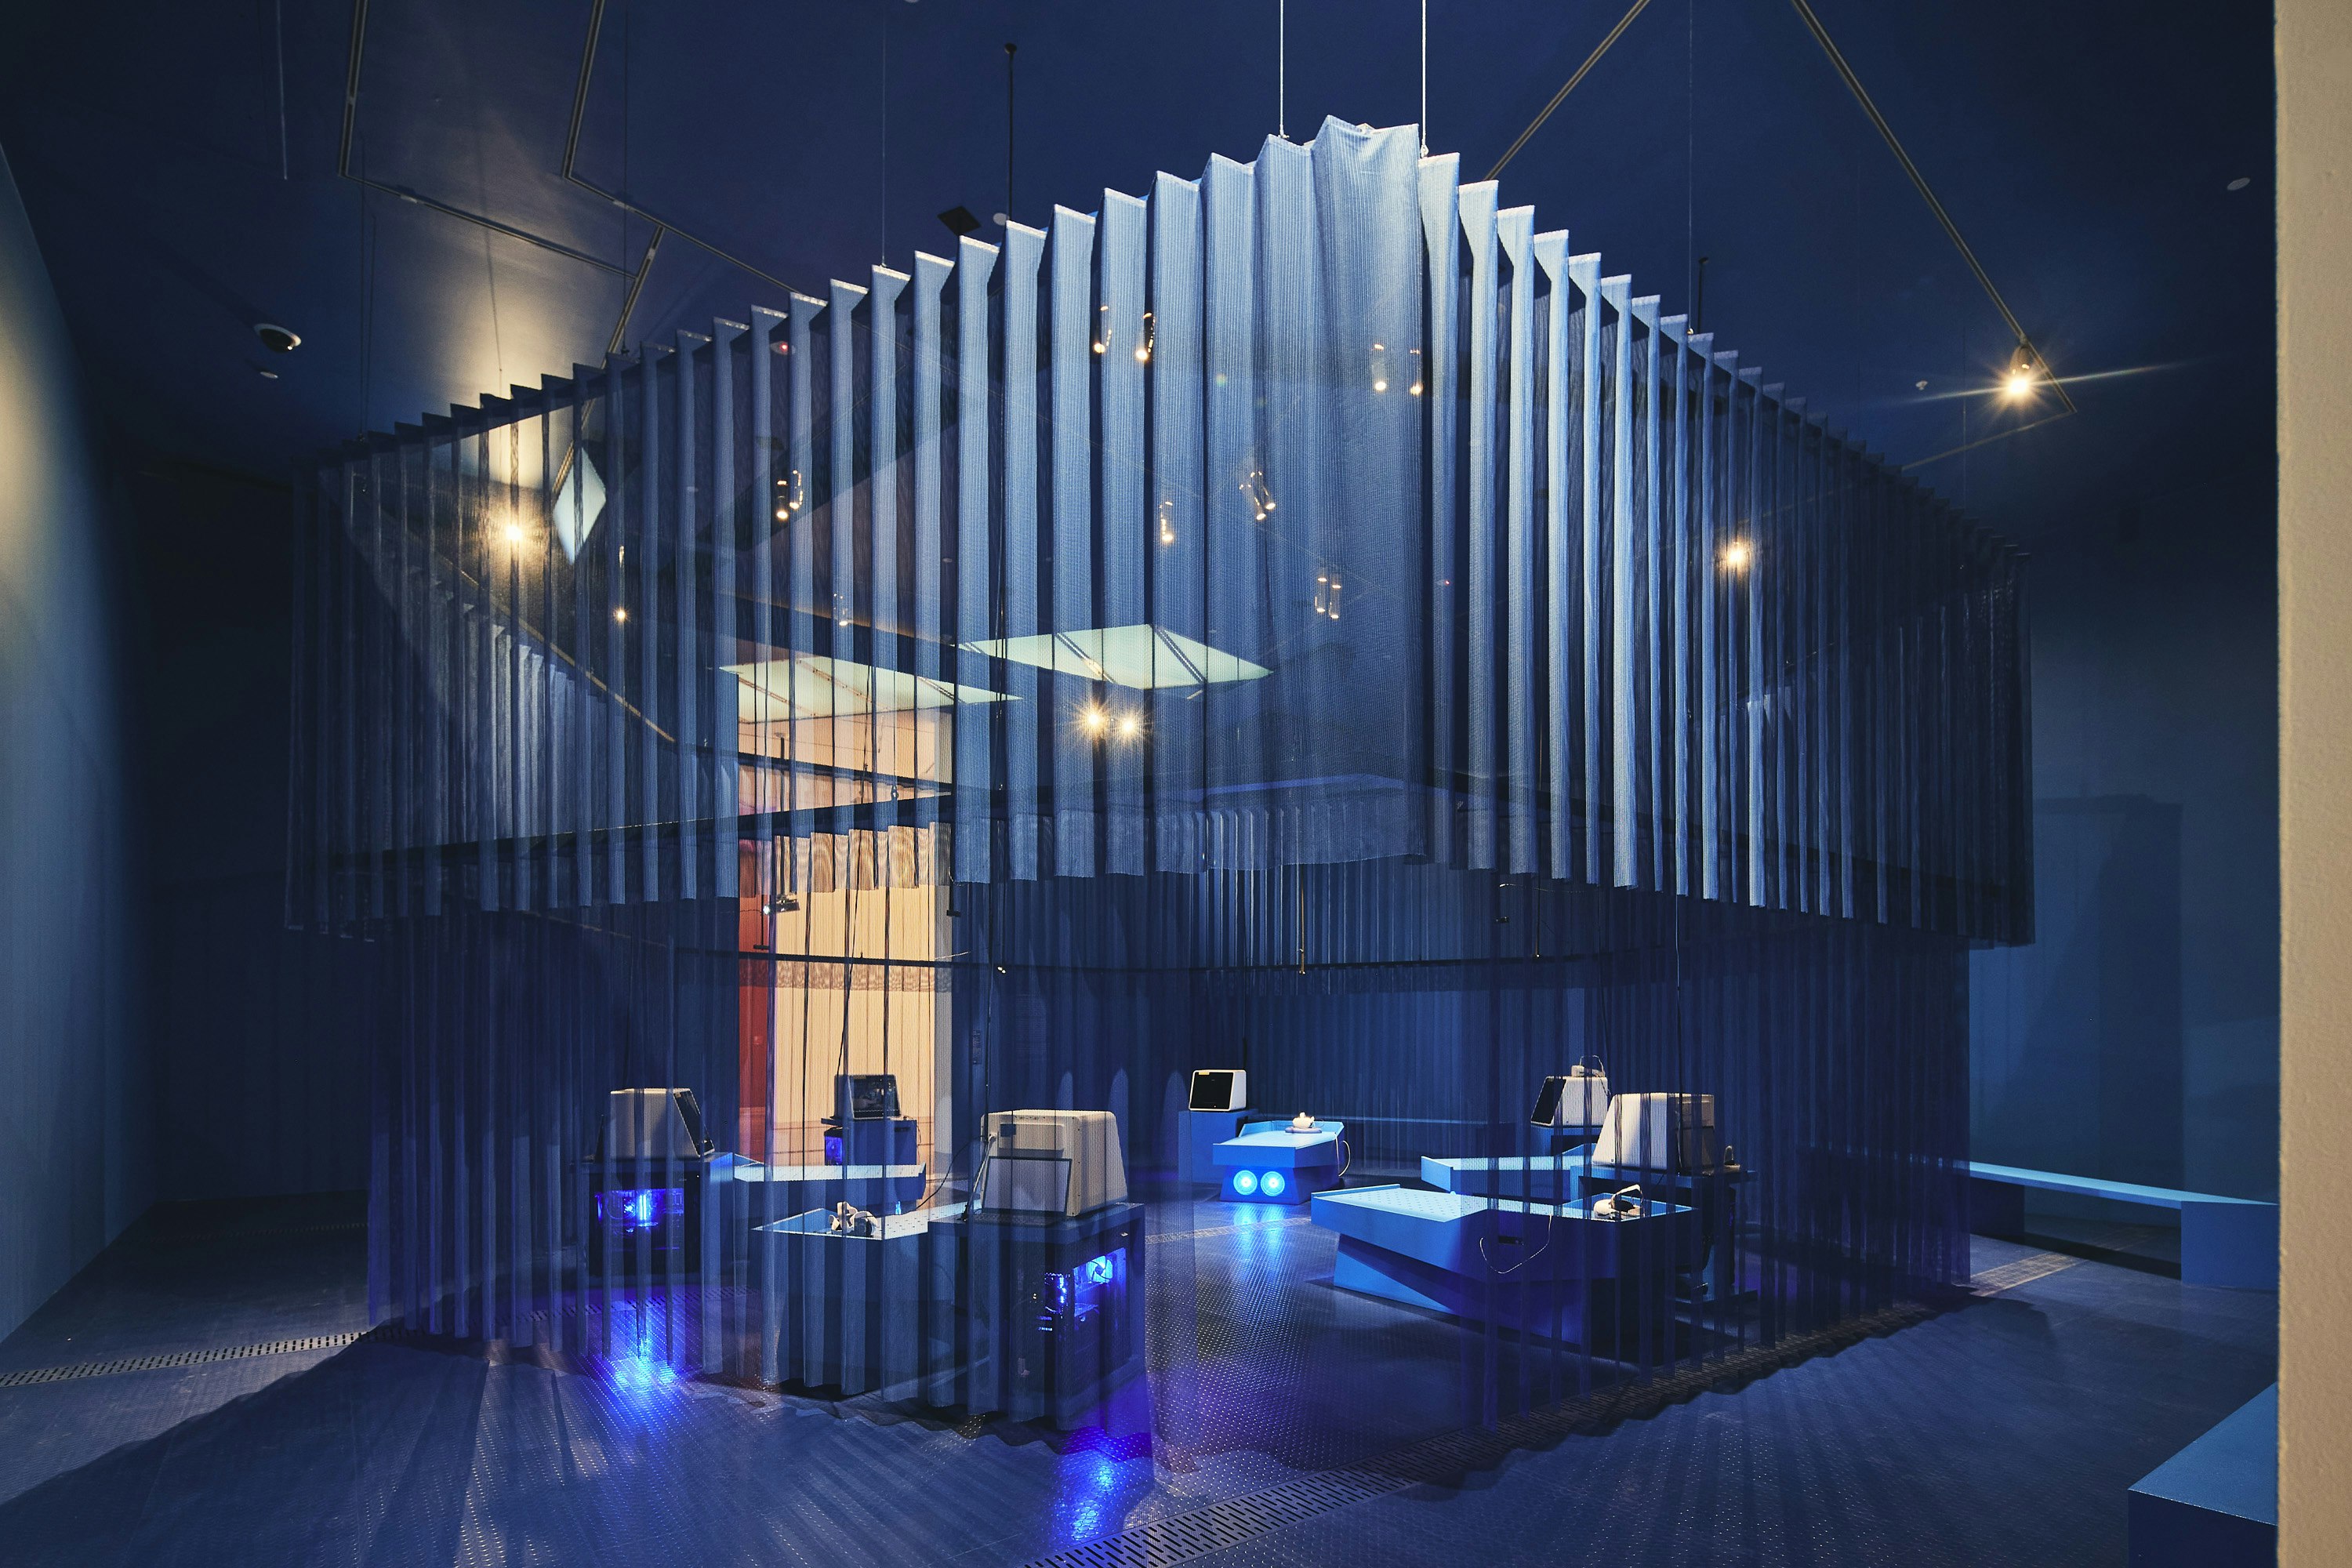 A see-through curtain encloses a square space within a large gallery room. Metal beds are within the room, and there is blue light coming from machines next to the beds.